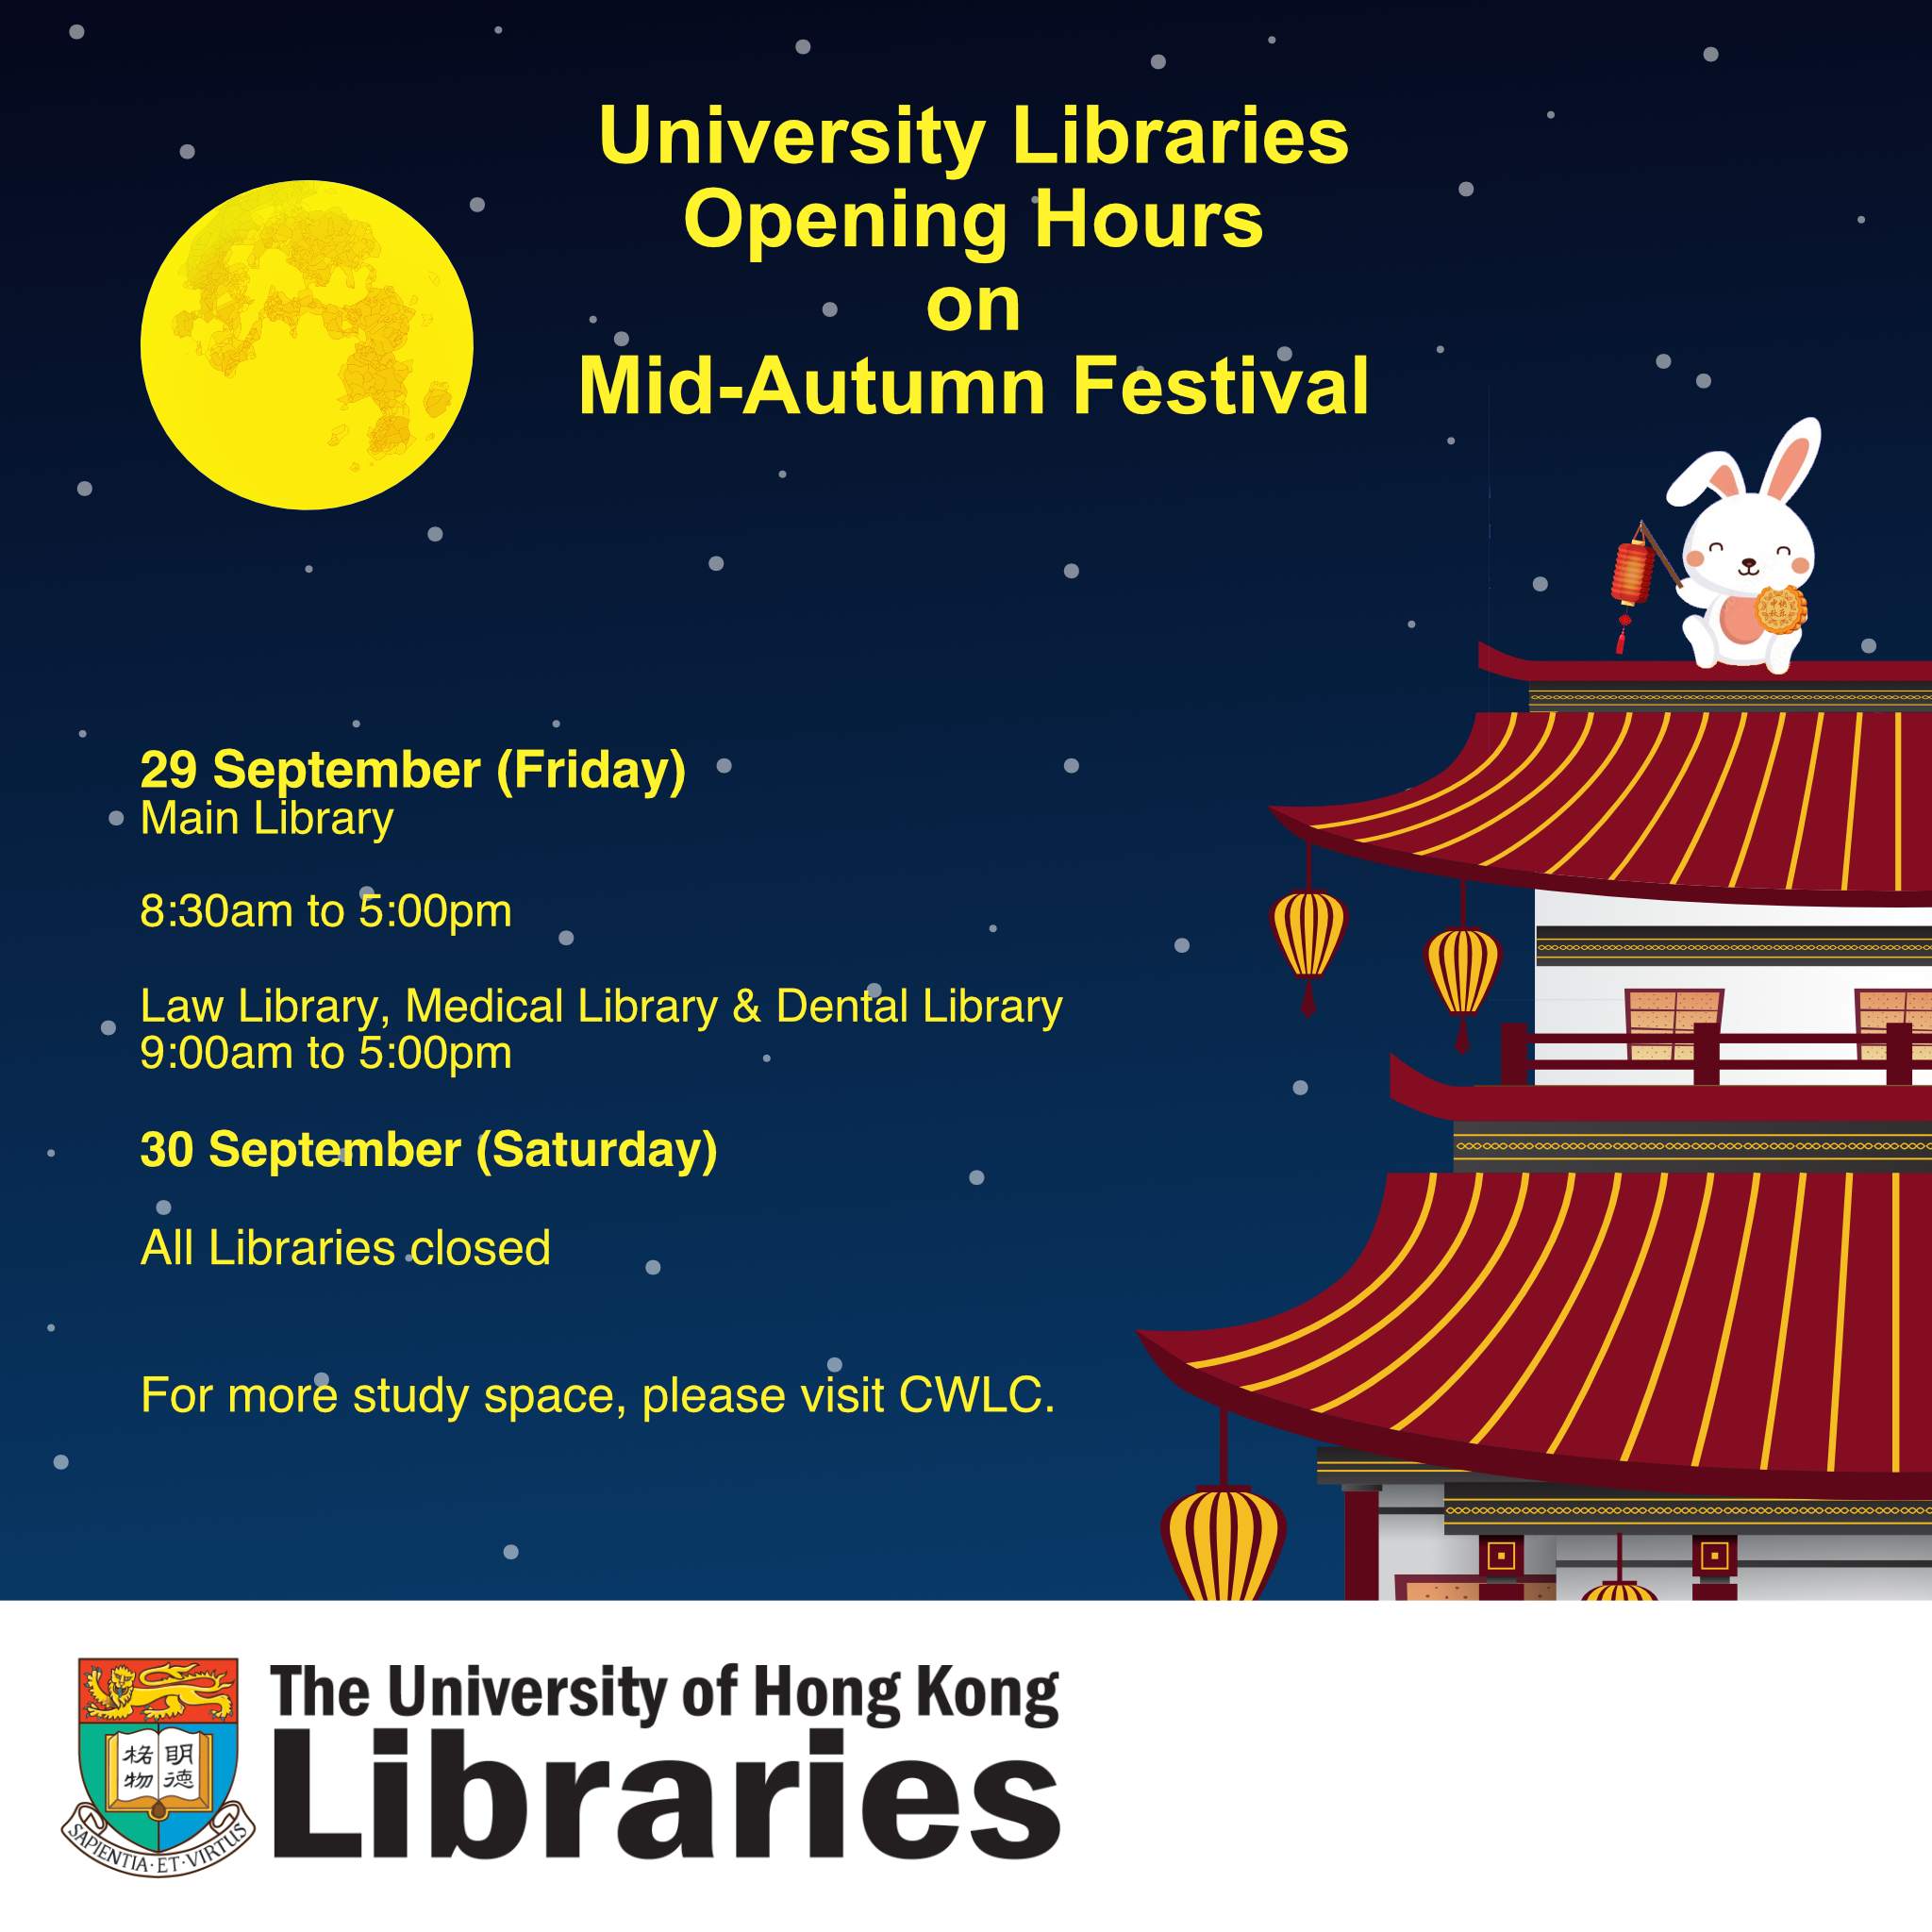 University Libraries Opening Hours on Mid-Autumn Festival